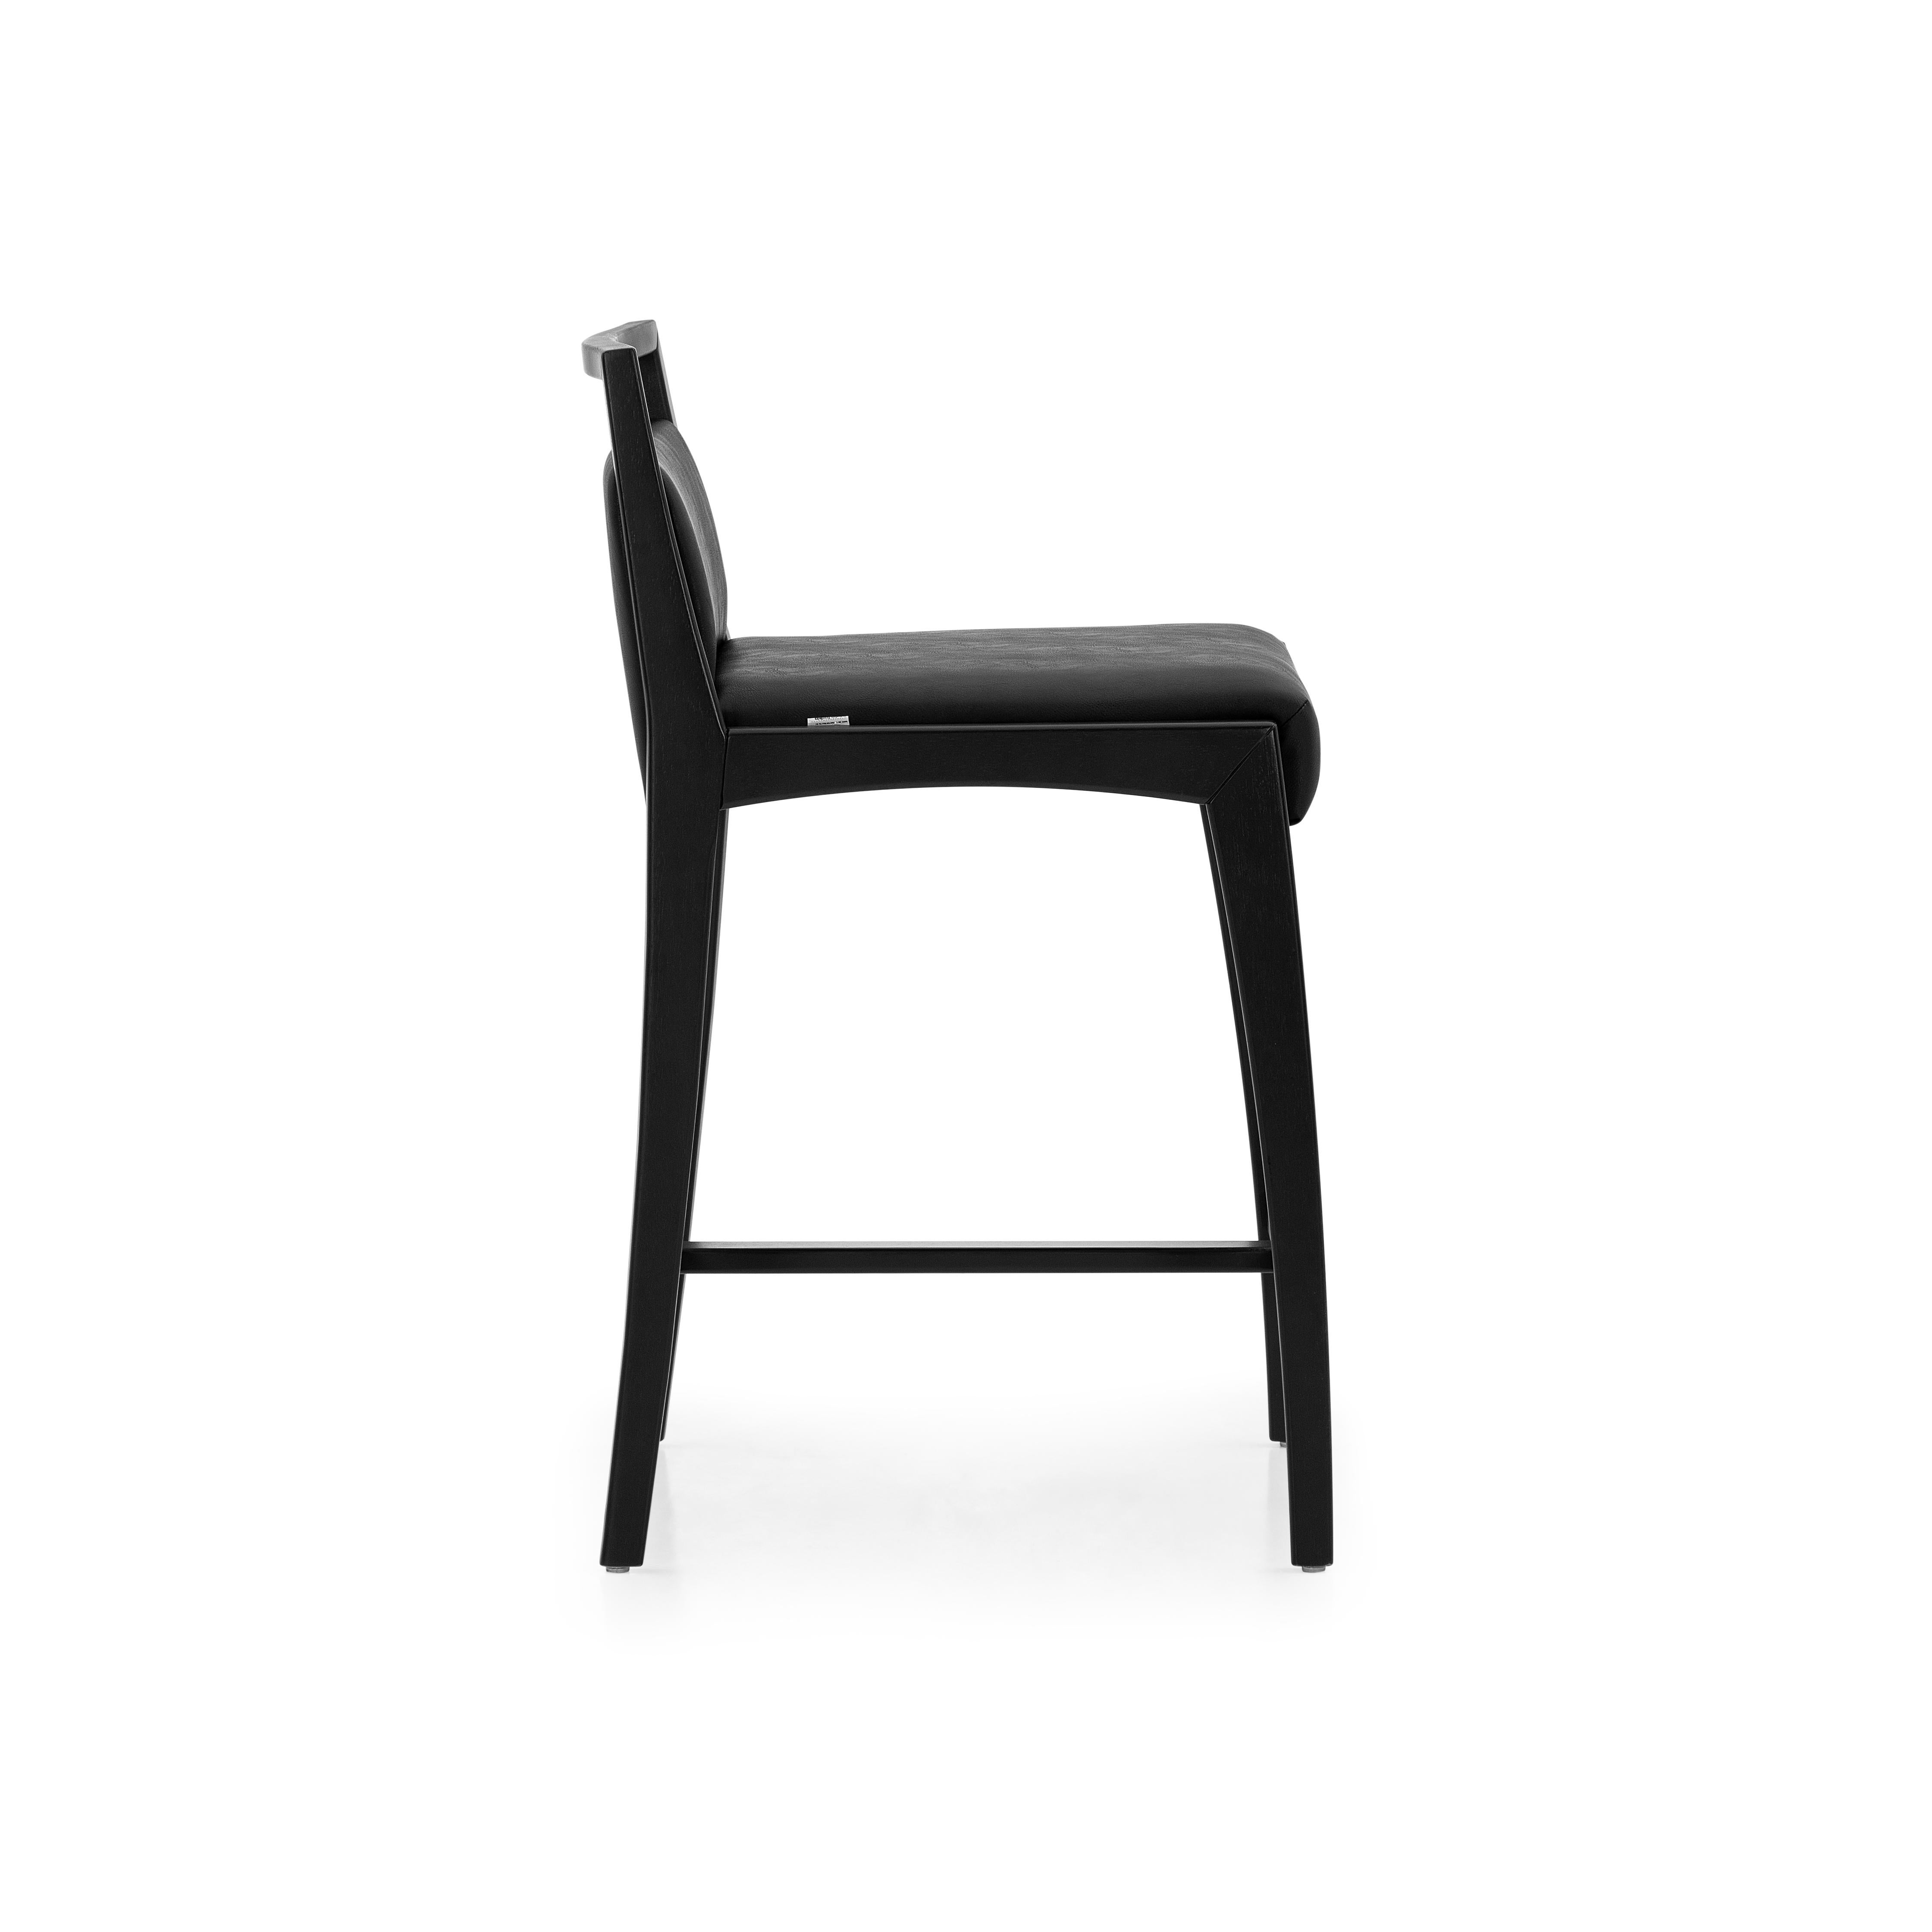 The Sotto counter stool is a piece that is designed with a taller high to use at a countertop or a high table. This chair has striking features, where resistance and delicacy meet. Designed with black finish wood legs and frame, a black faux leather